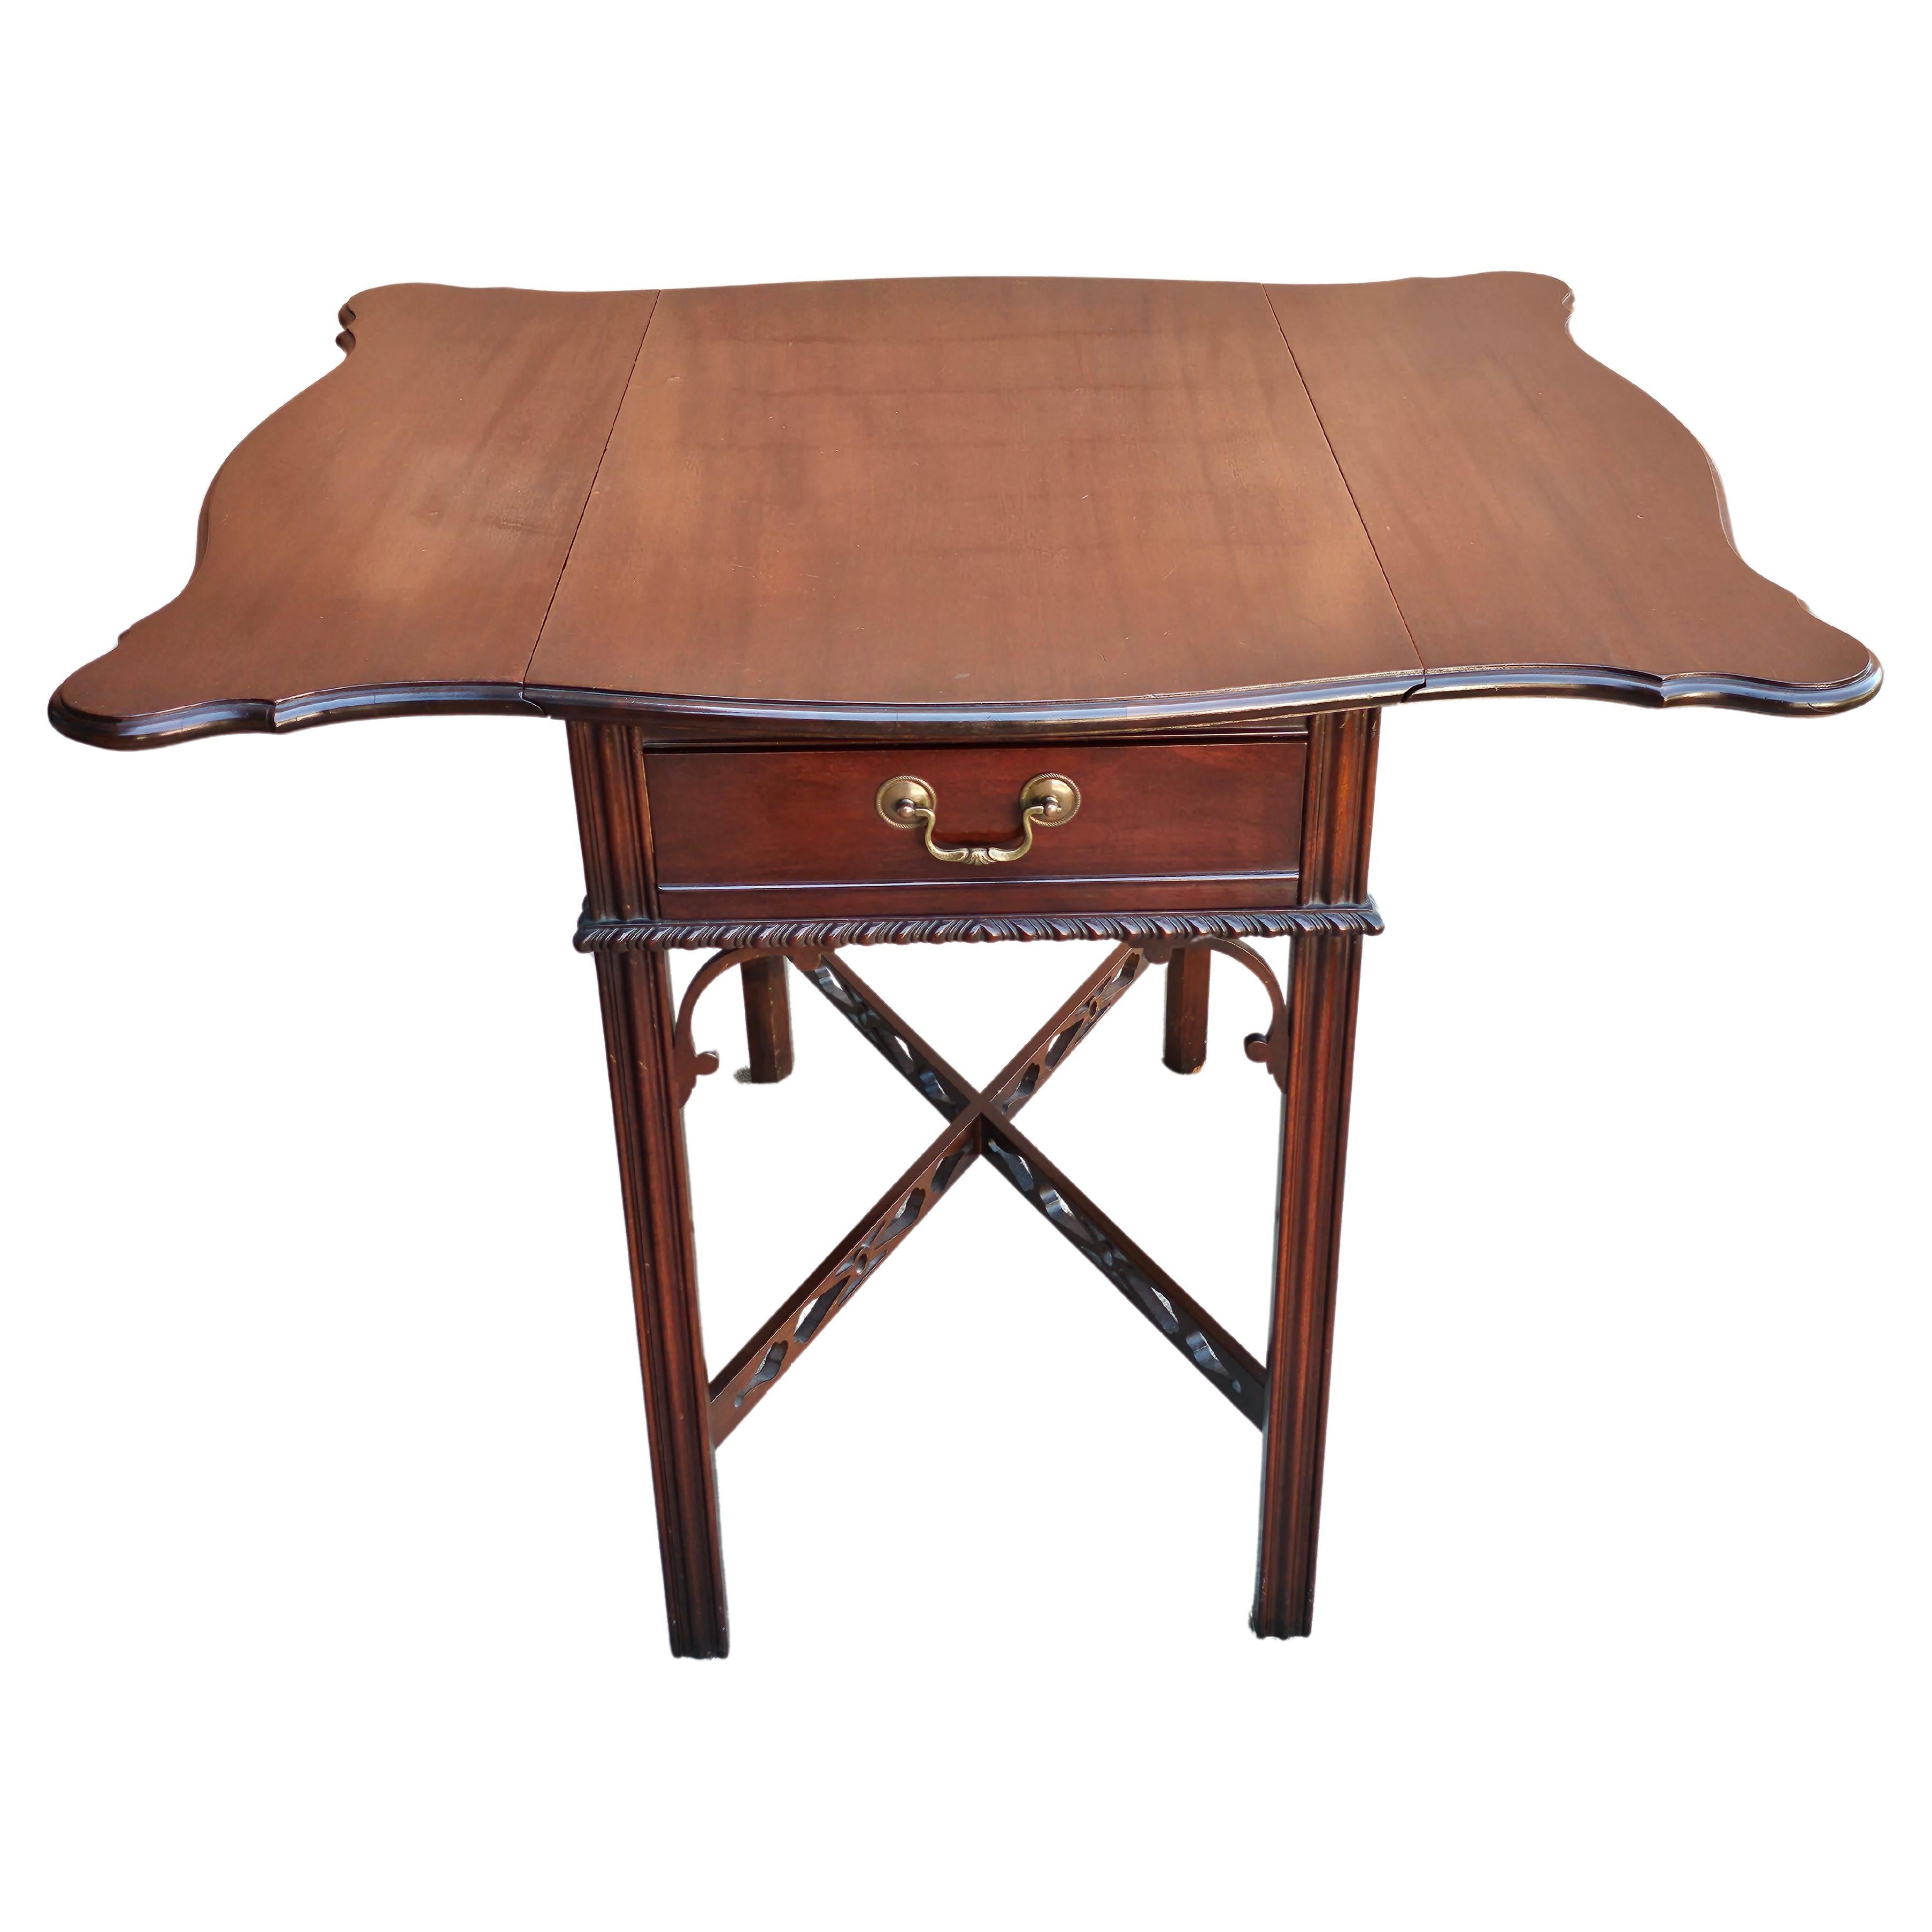 Early 20th Century Kreimer and Brother Co Mahogany Pembroke Table